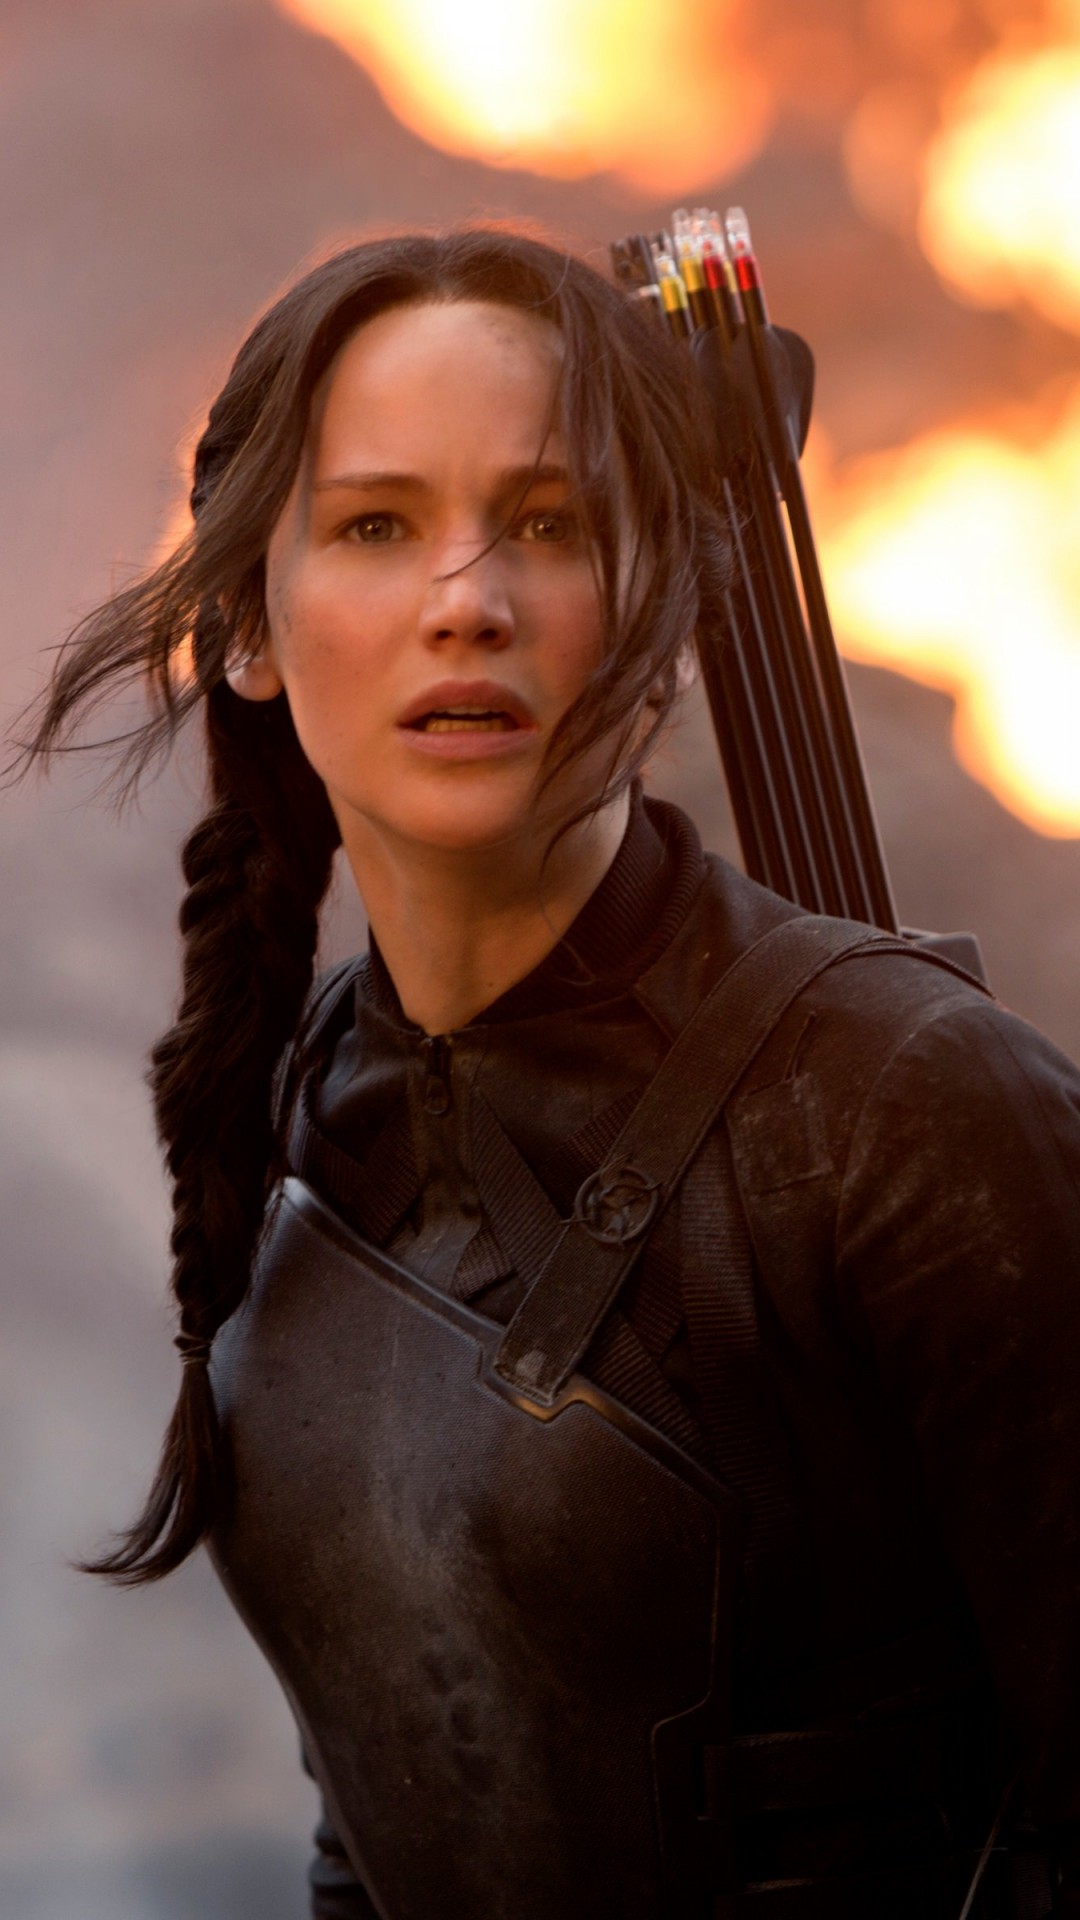 Jennifer Lawrence in The Hunger Games Wallpaper for HTC One